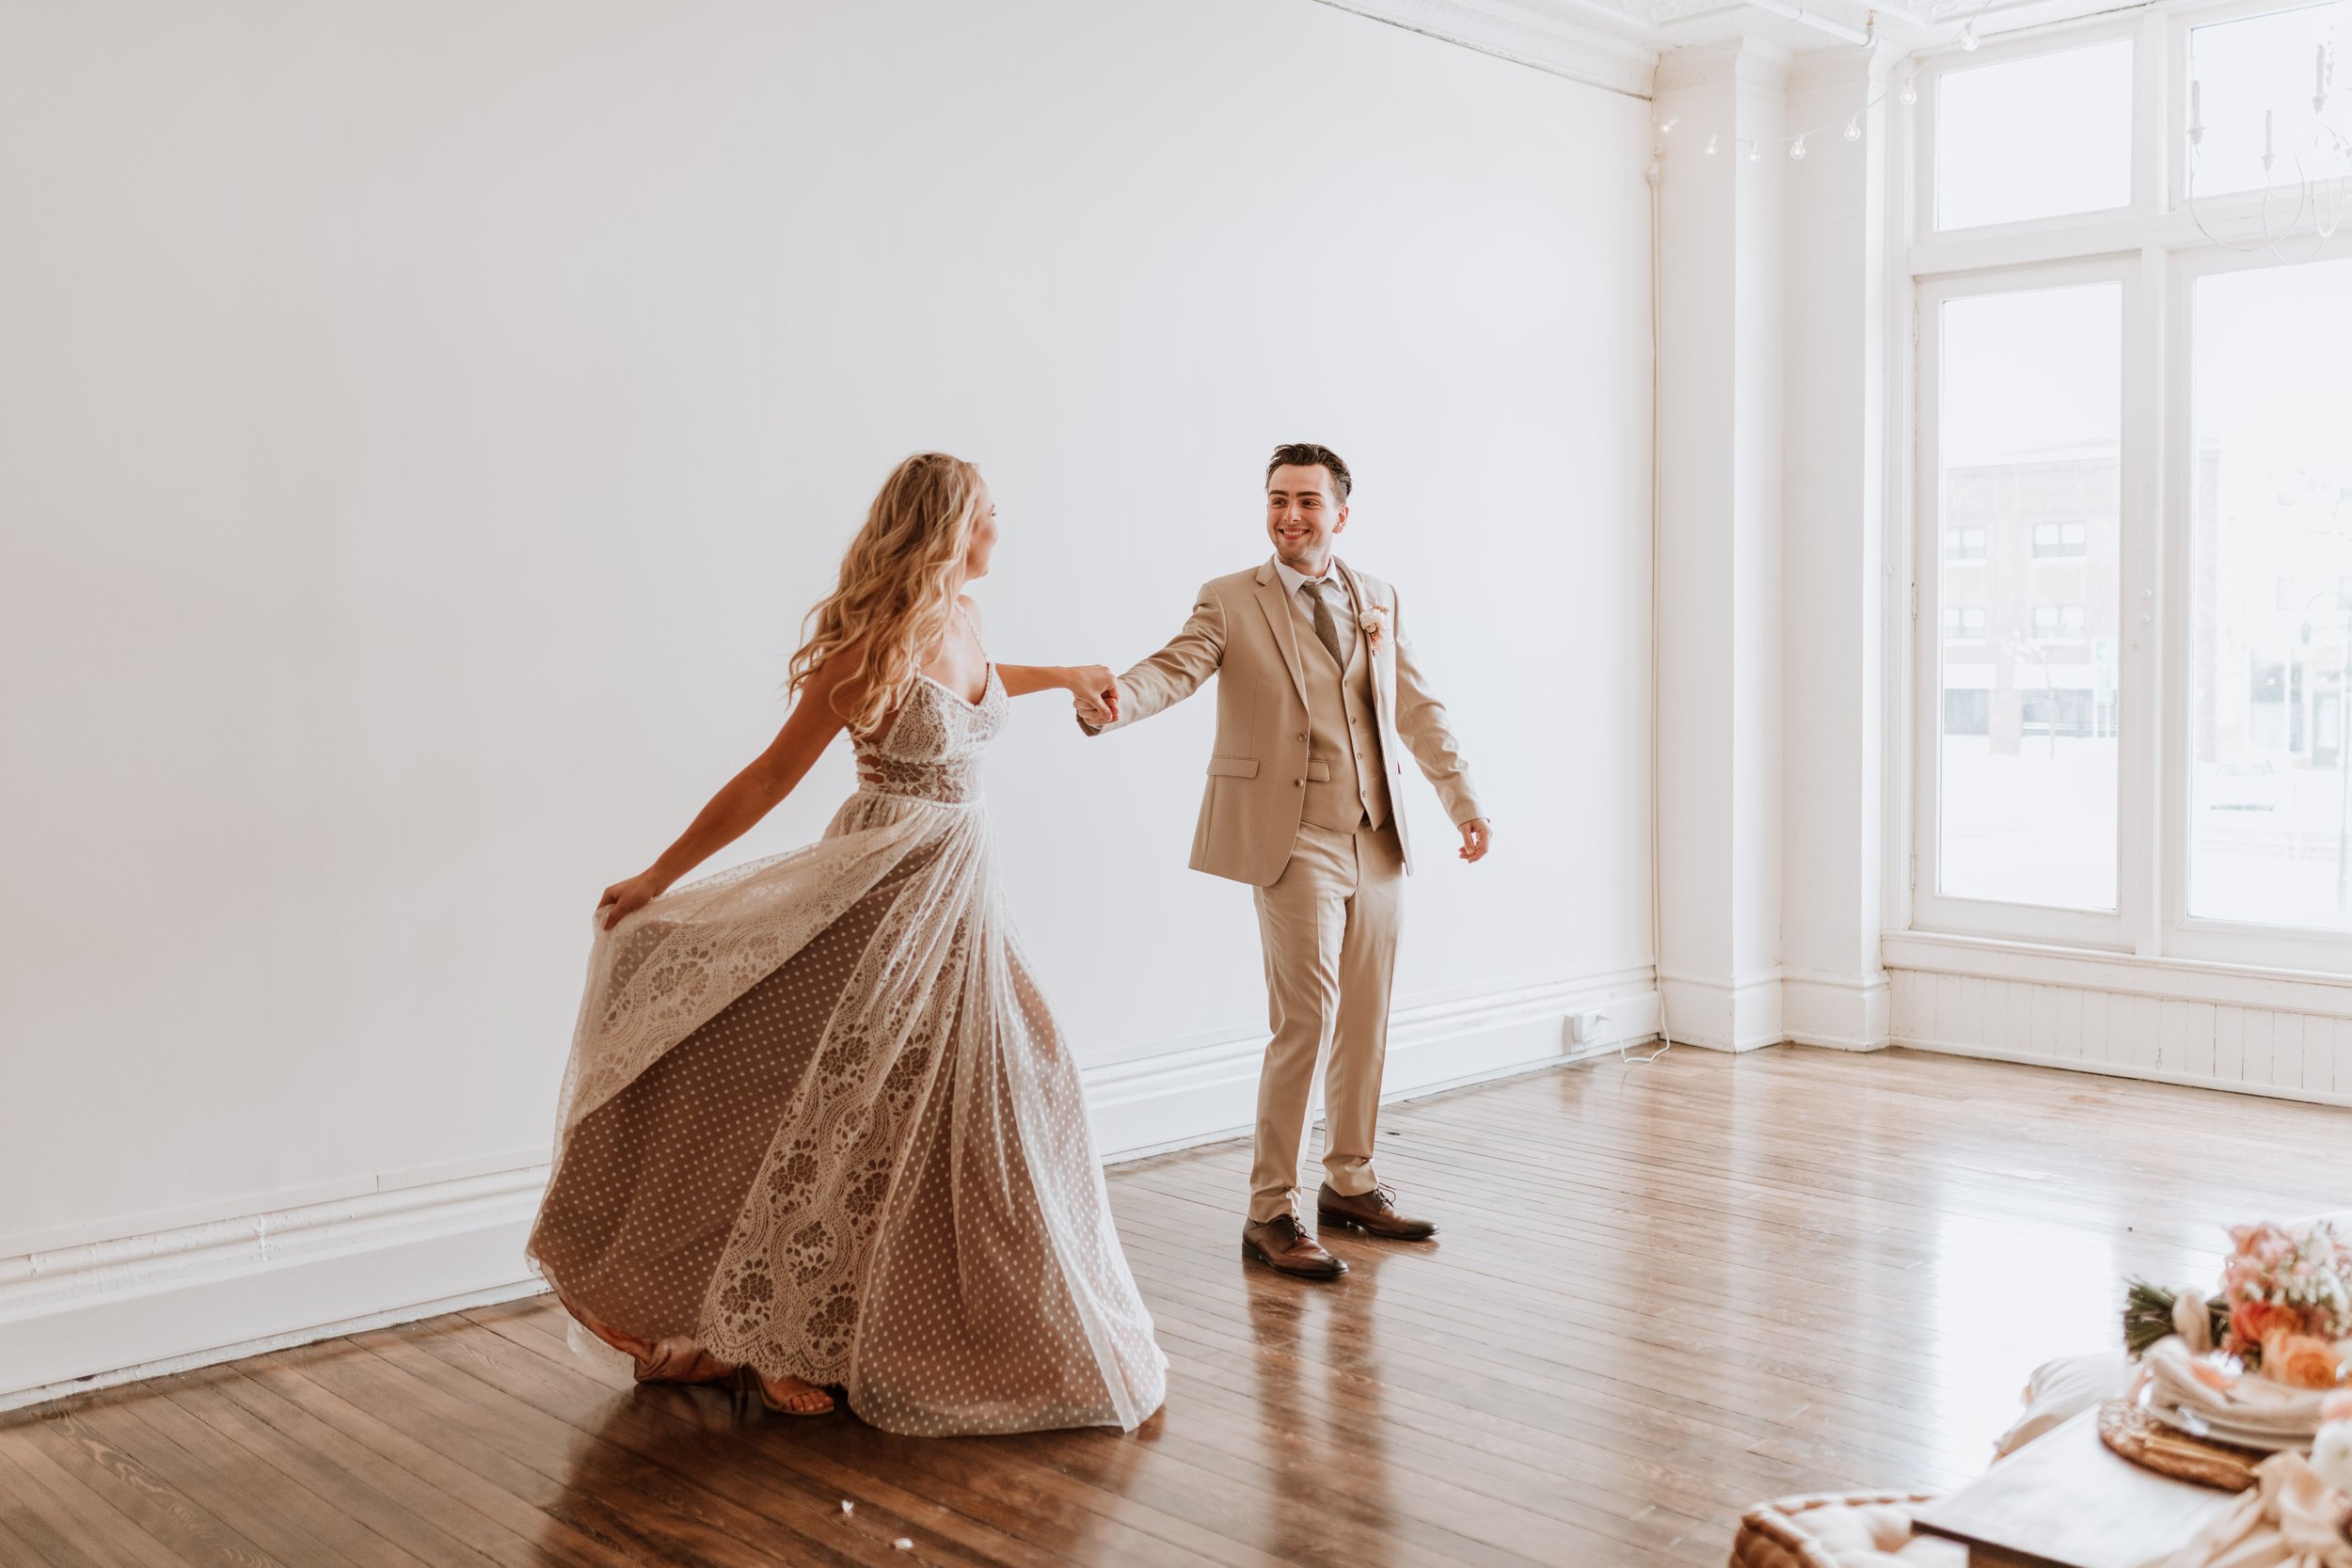 Newlywed couple dancing together in an empty room